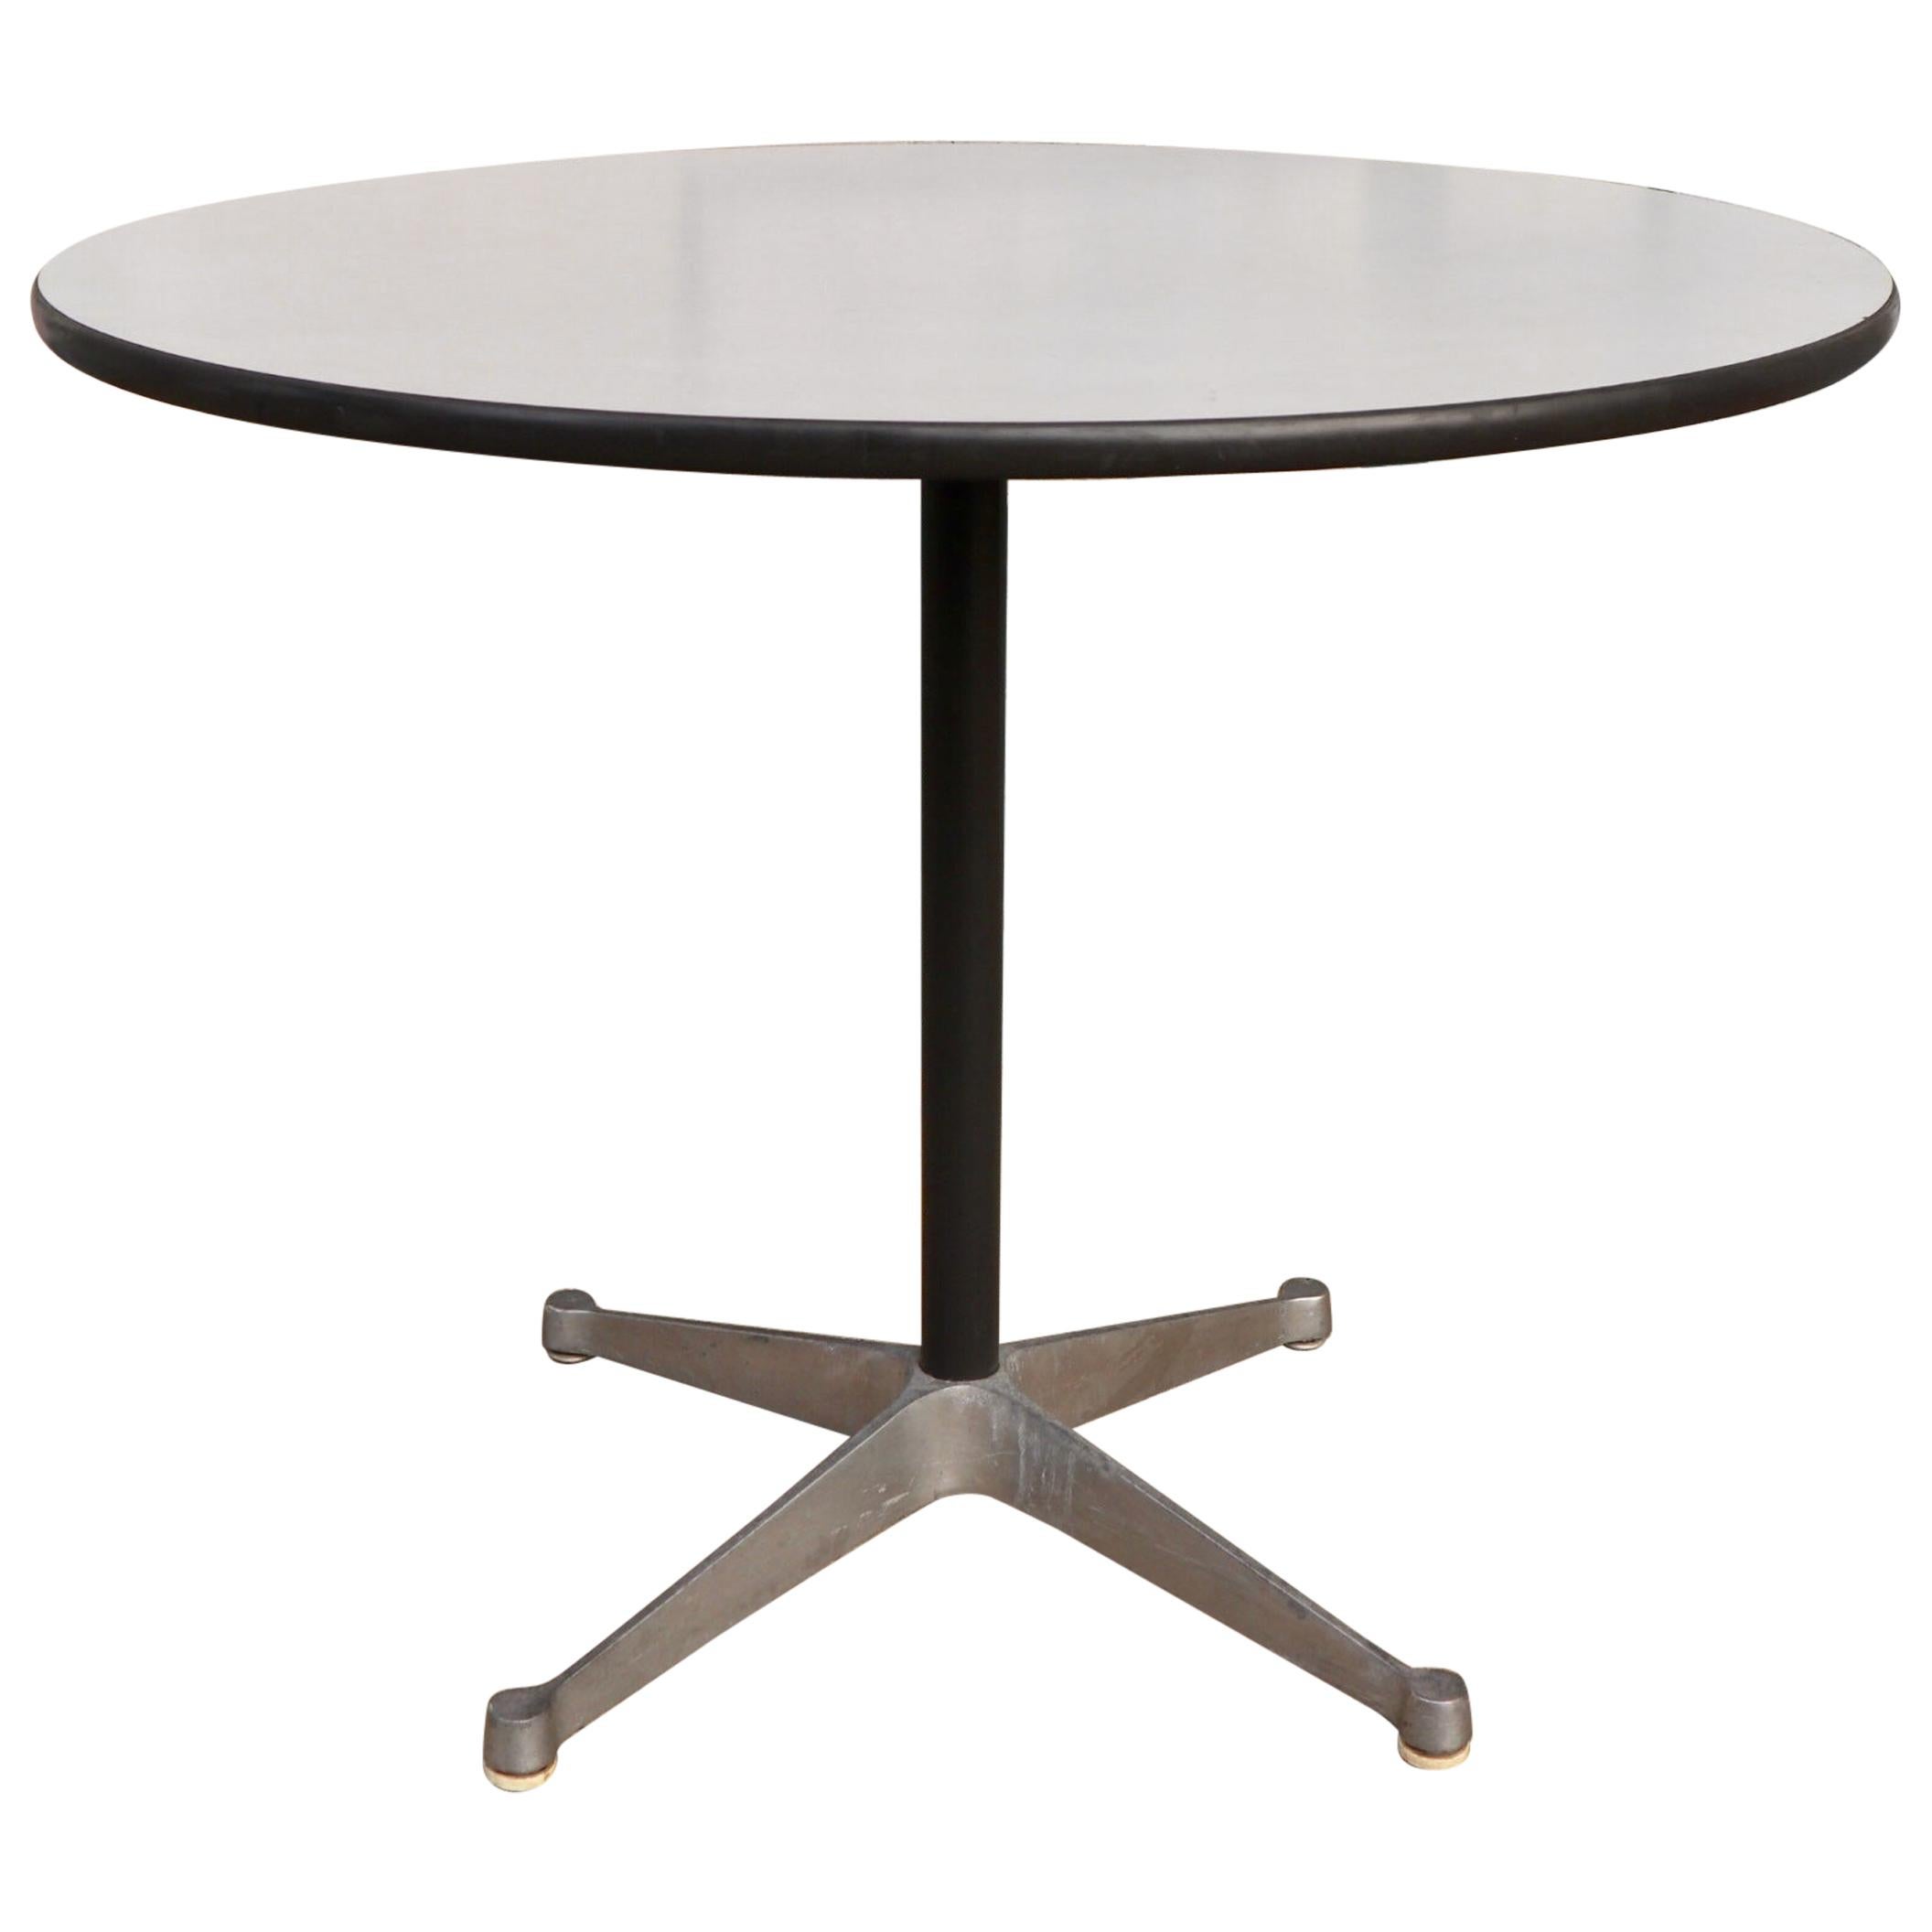 Herman Miller Eames Round Dining Table with Aluminum Base